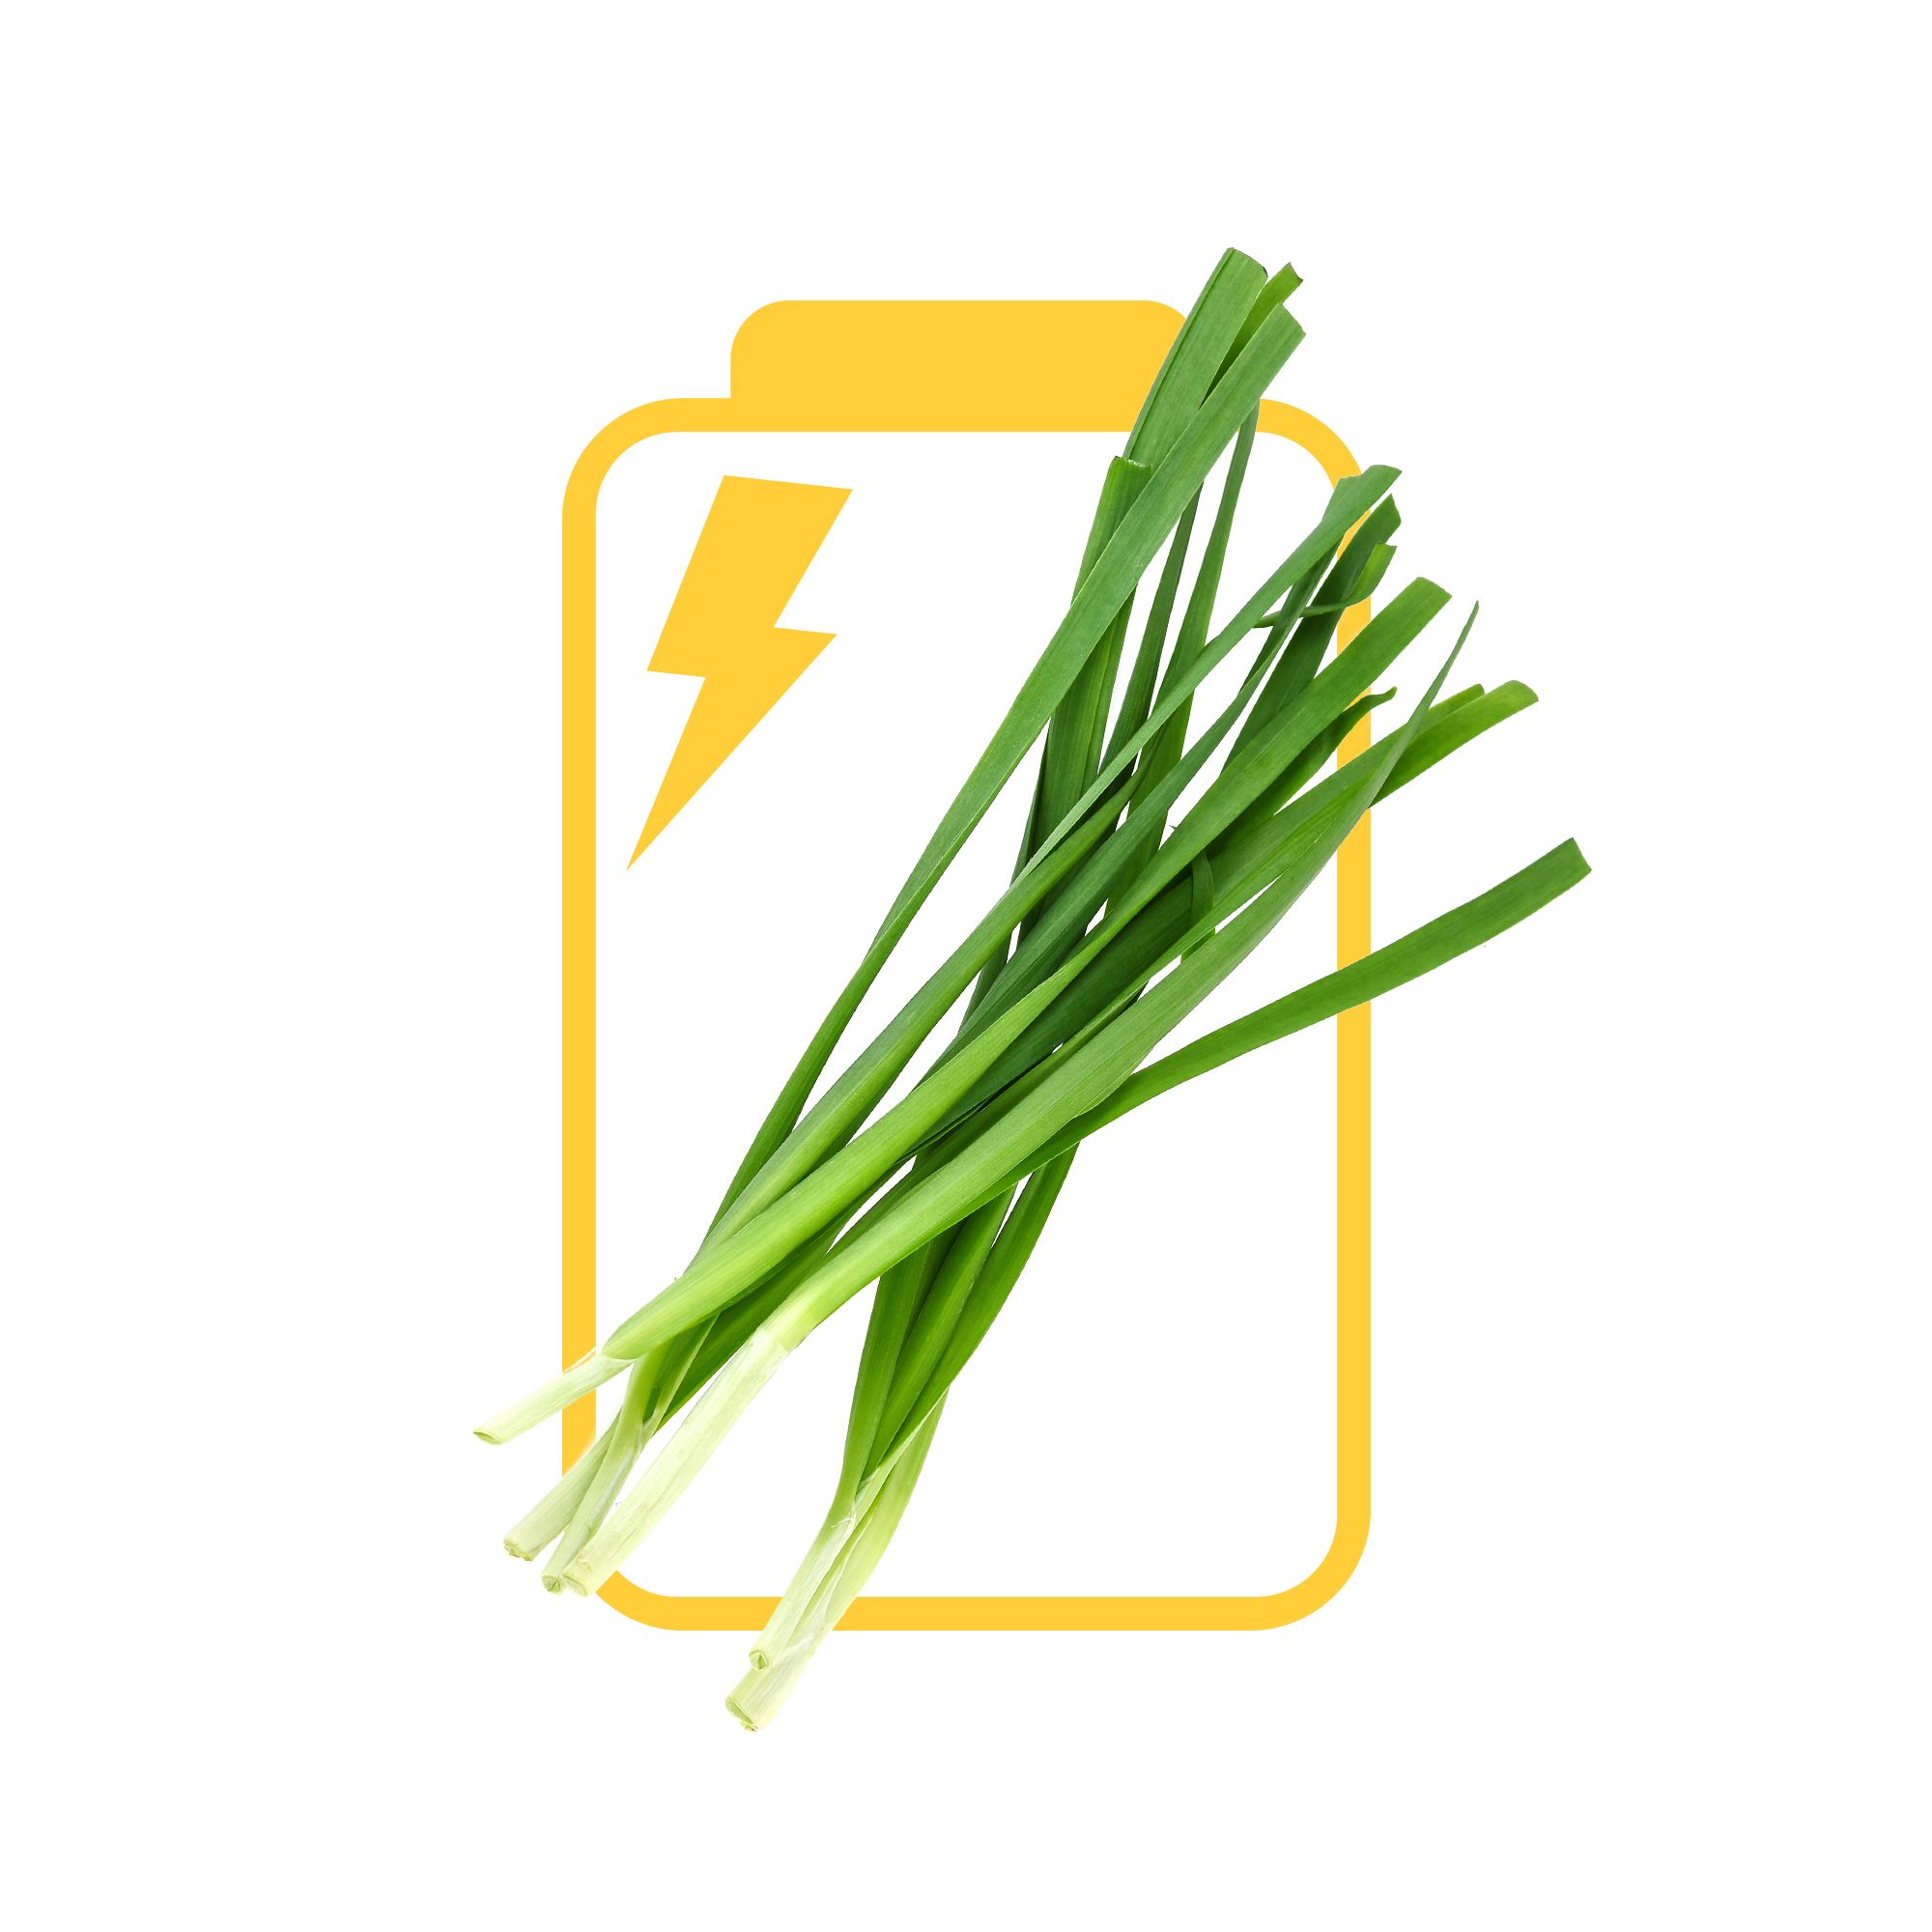 Vegetable, Chives, Leek, Plant, Welsh onion, Grass, Flowering plant, Garlic chives, Scallion, Food, 